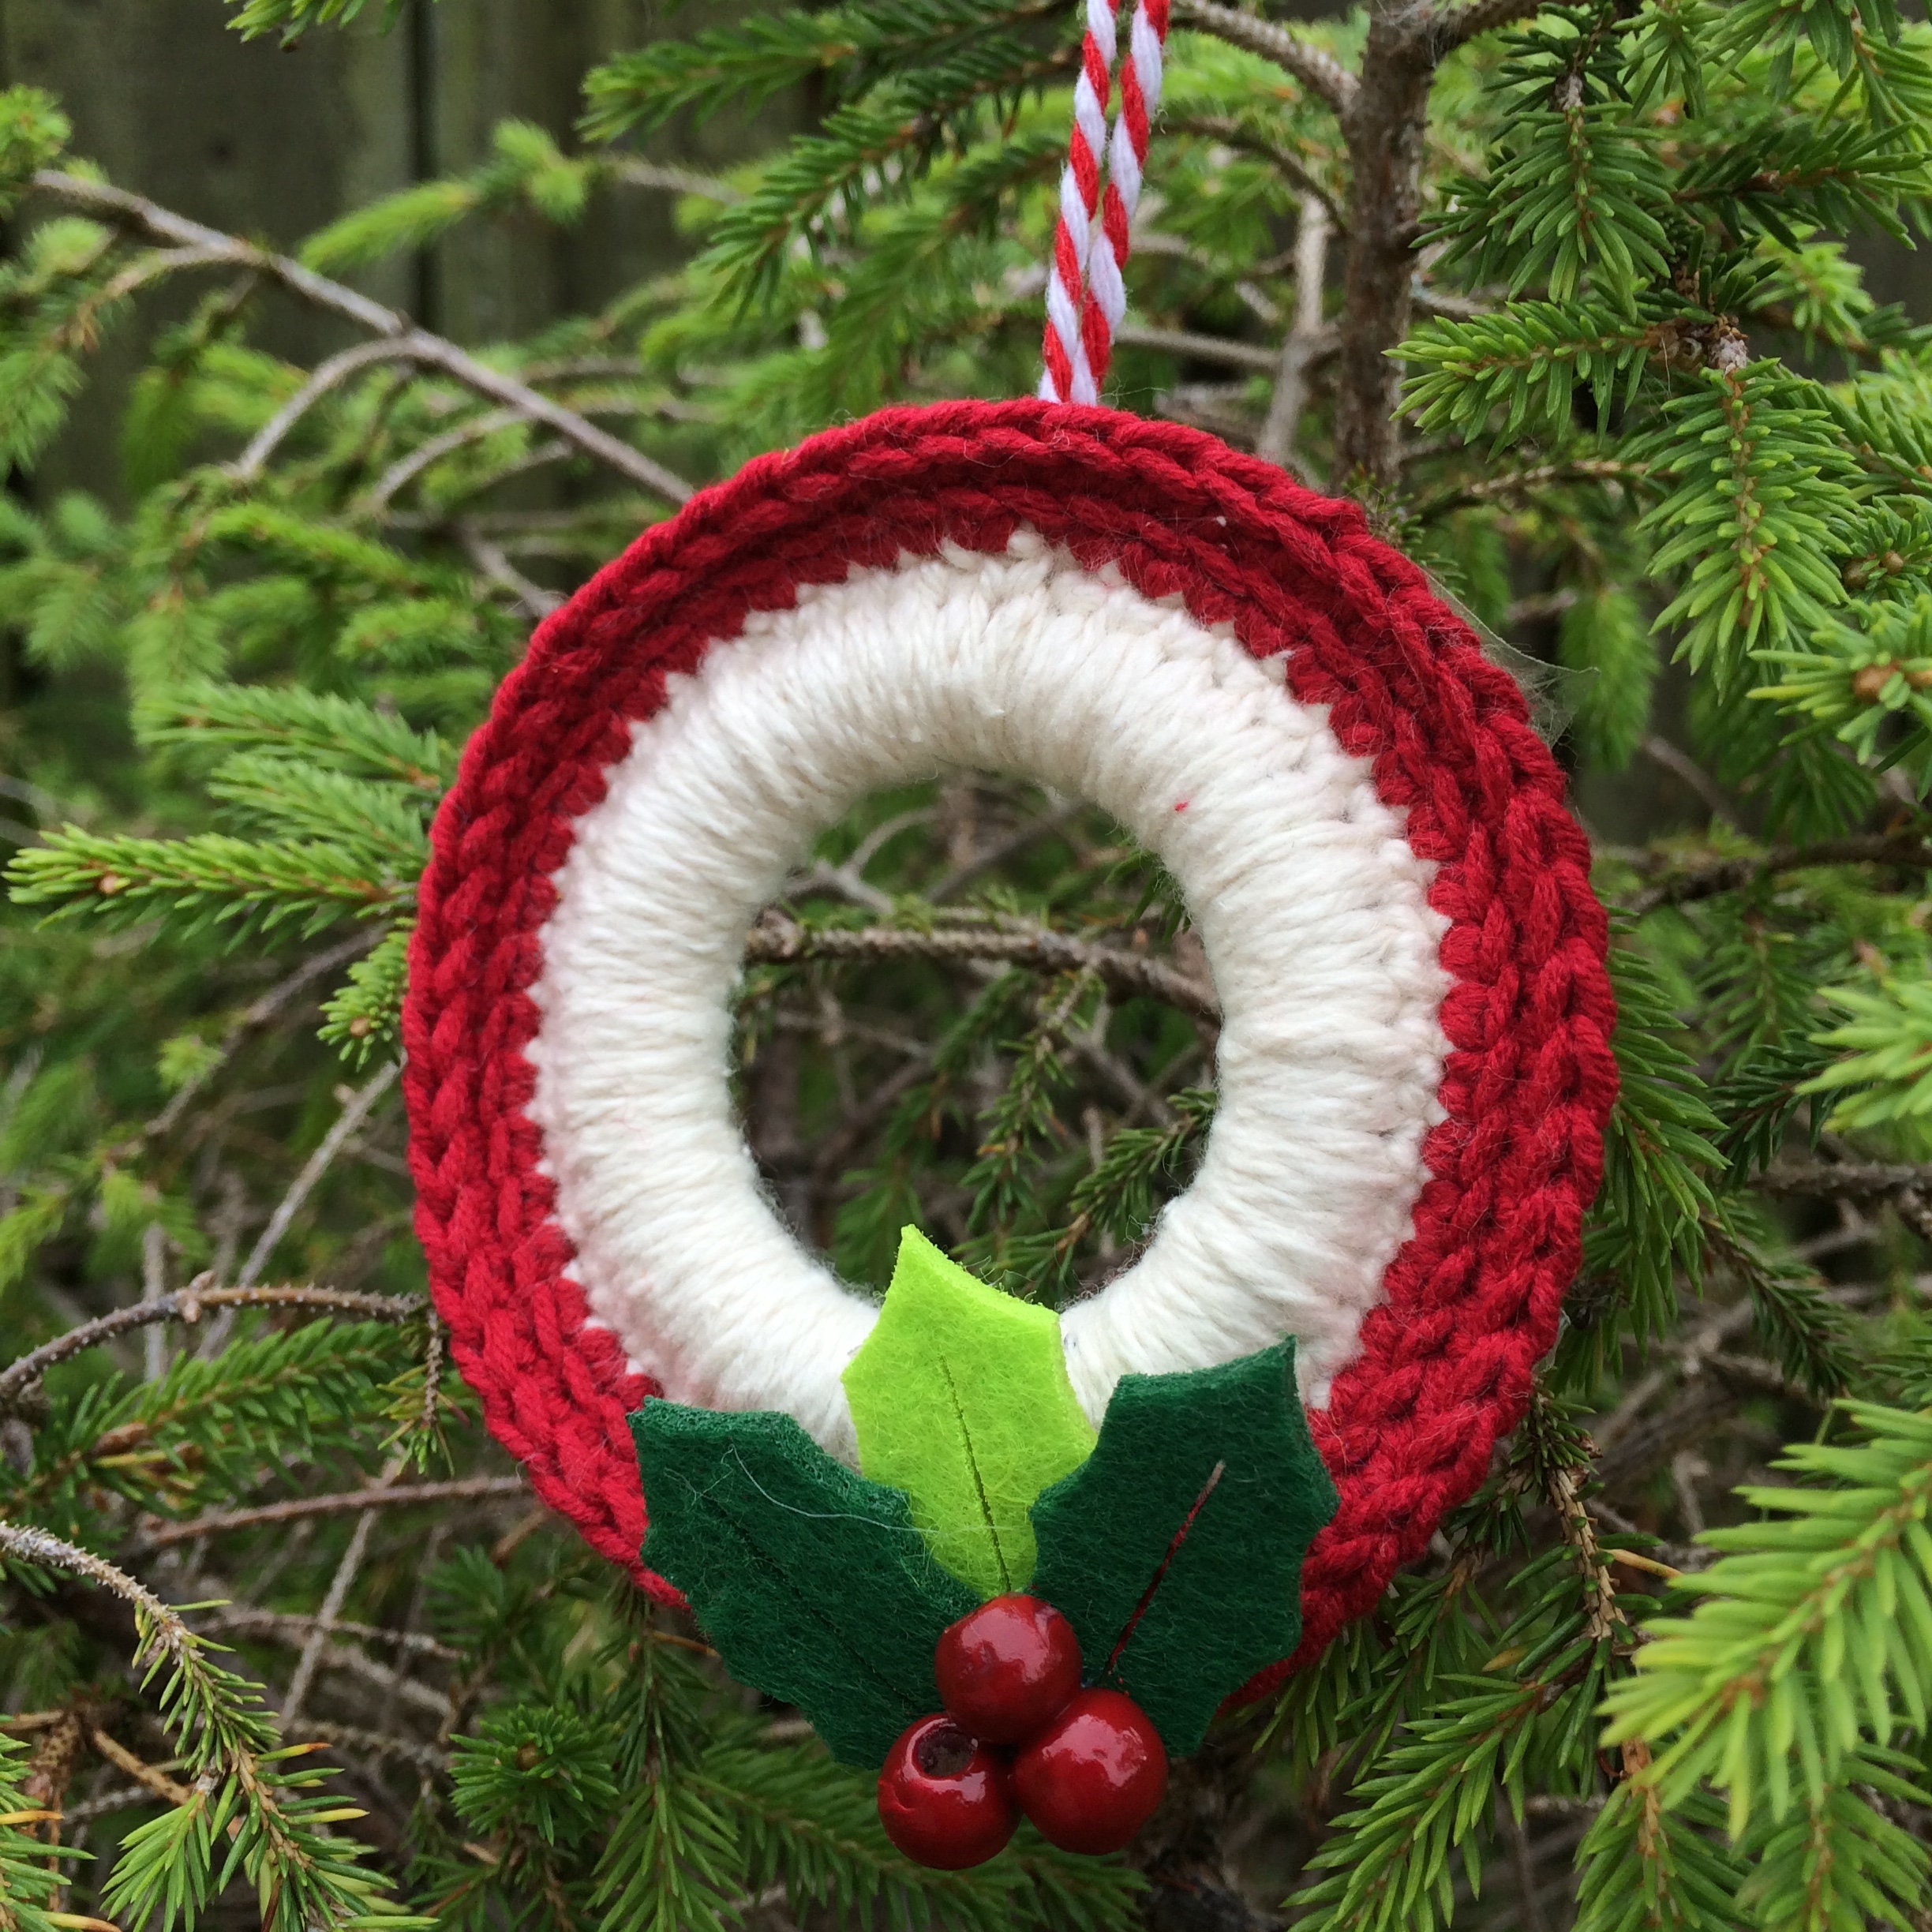 Set of 4 Crochet Wreath pins (Made and ready to ship) crochet Christmas Pins